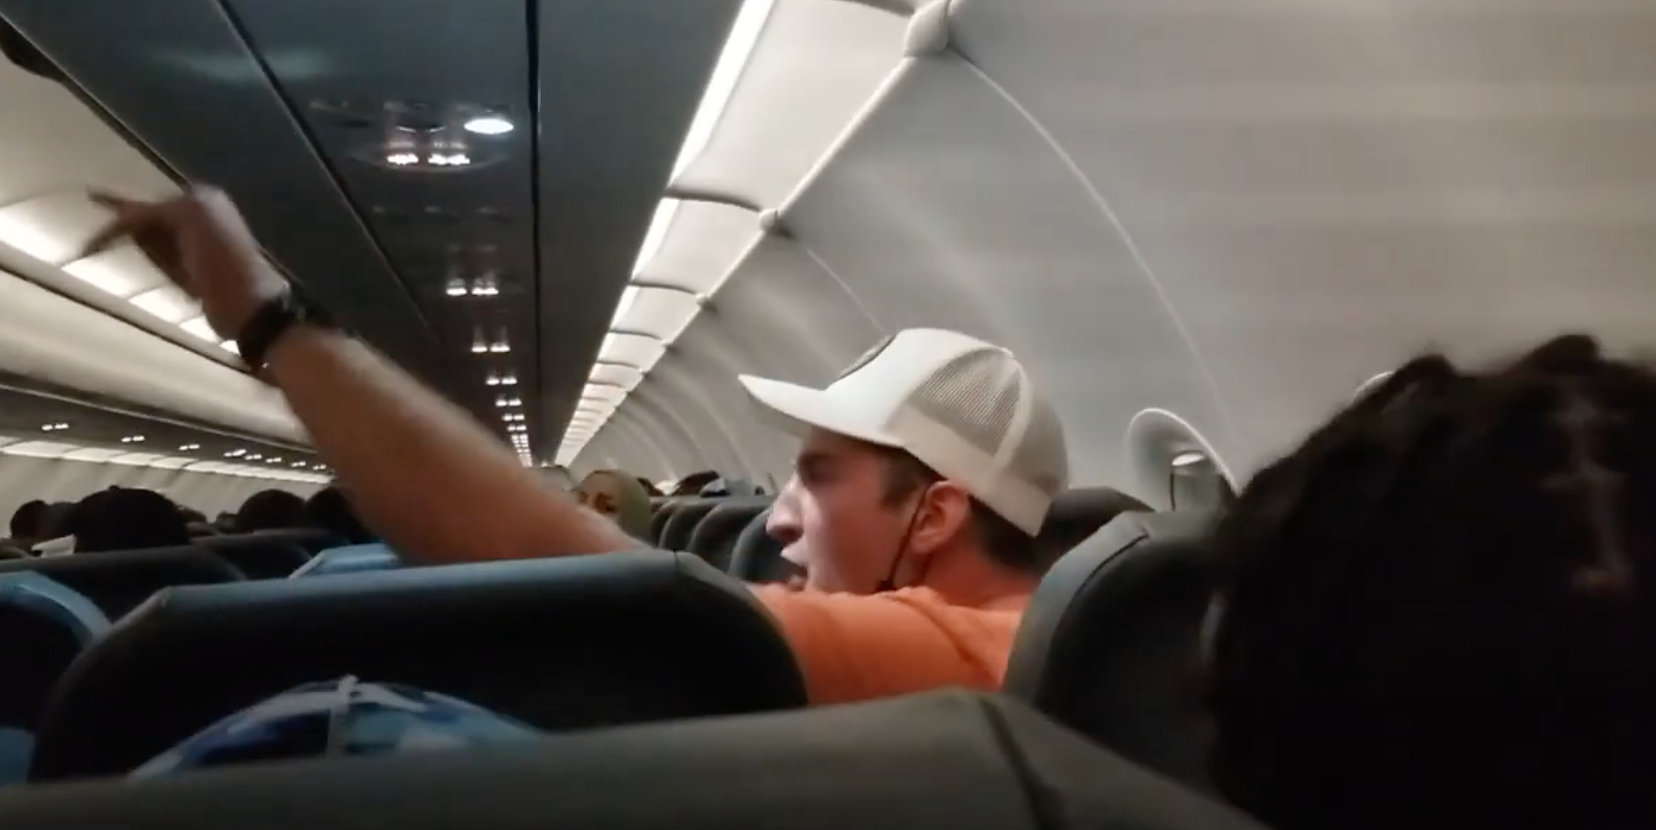 Frontier Airlines Crew Suspended After Duct Taping Passenger Who Allegedly Assaulted Flight